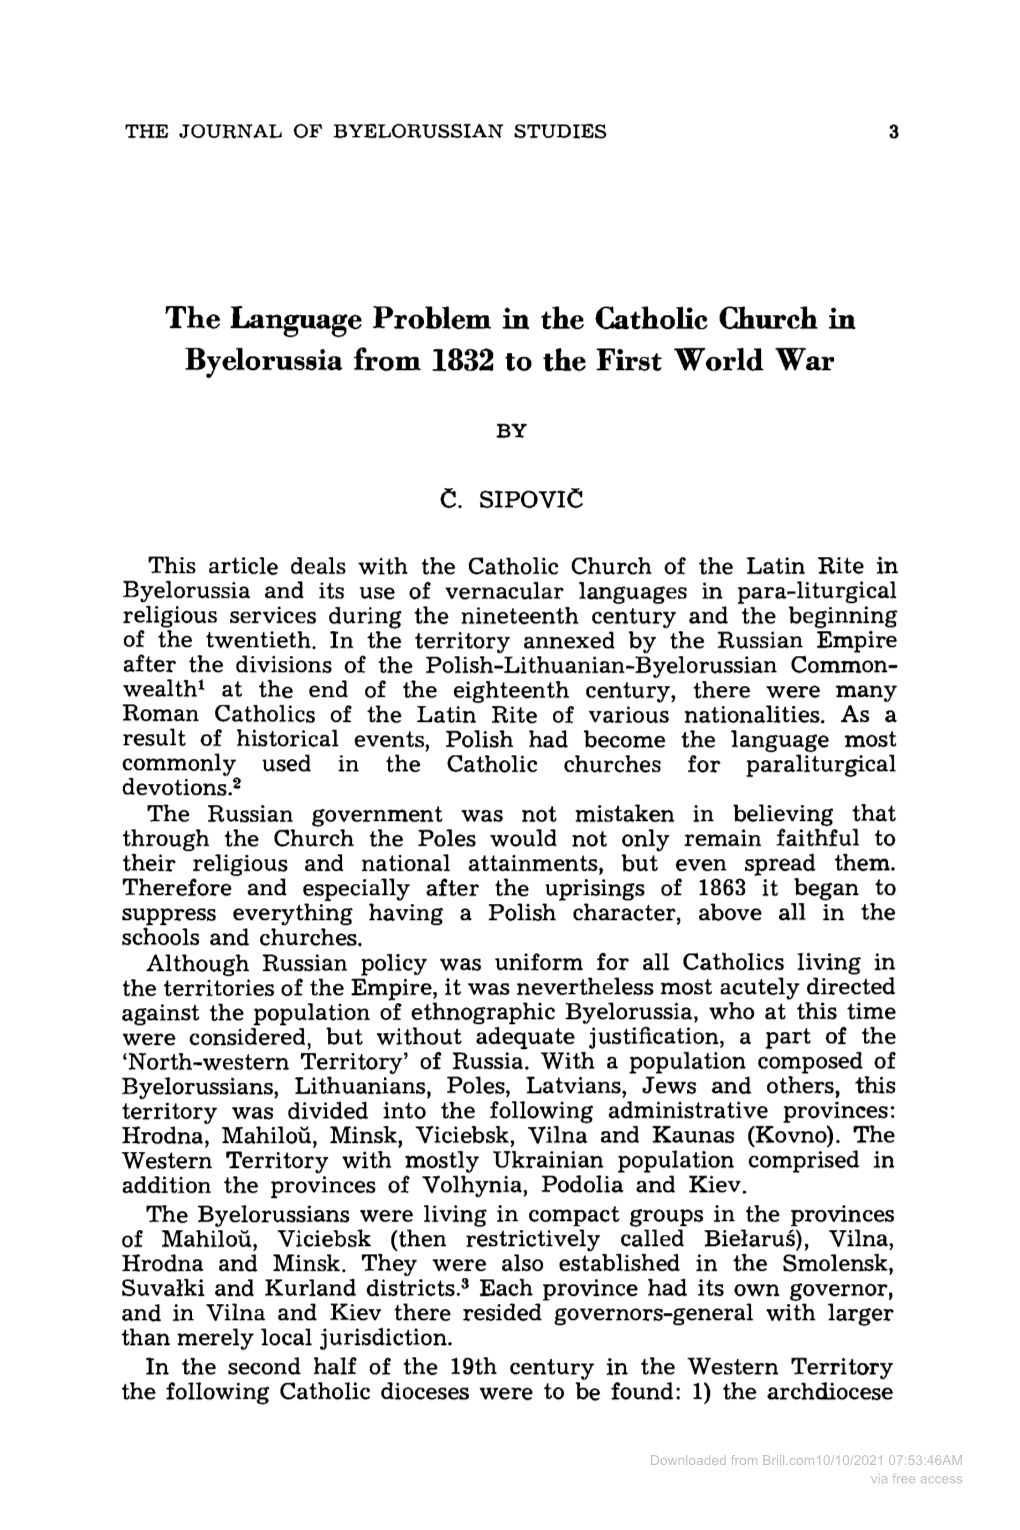 The Language Problem in the Catholic Church in Byelorussia from 1832 to the First World War